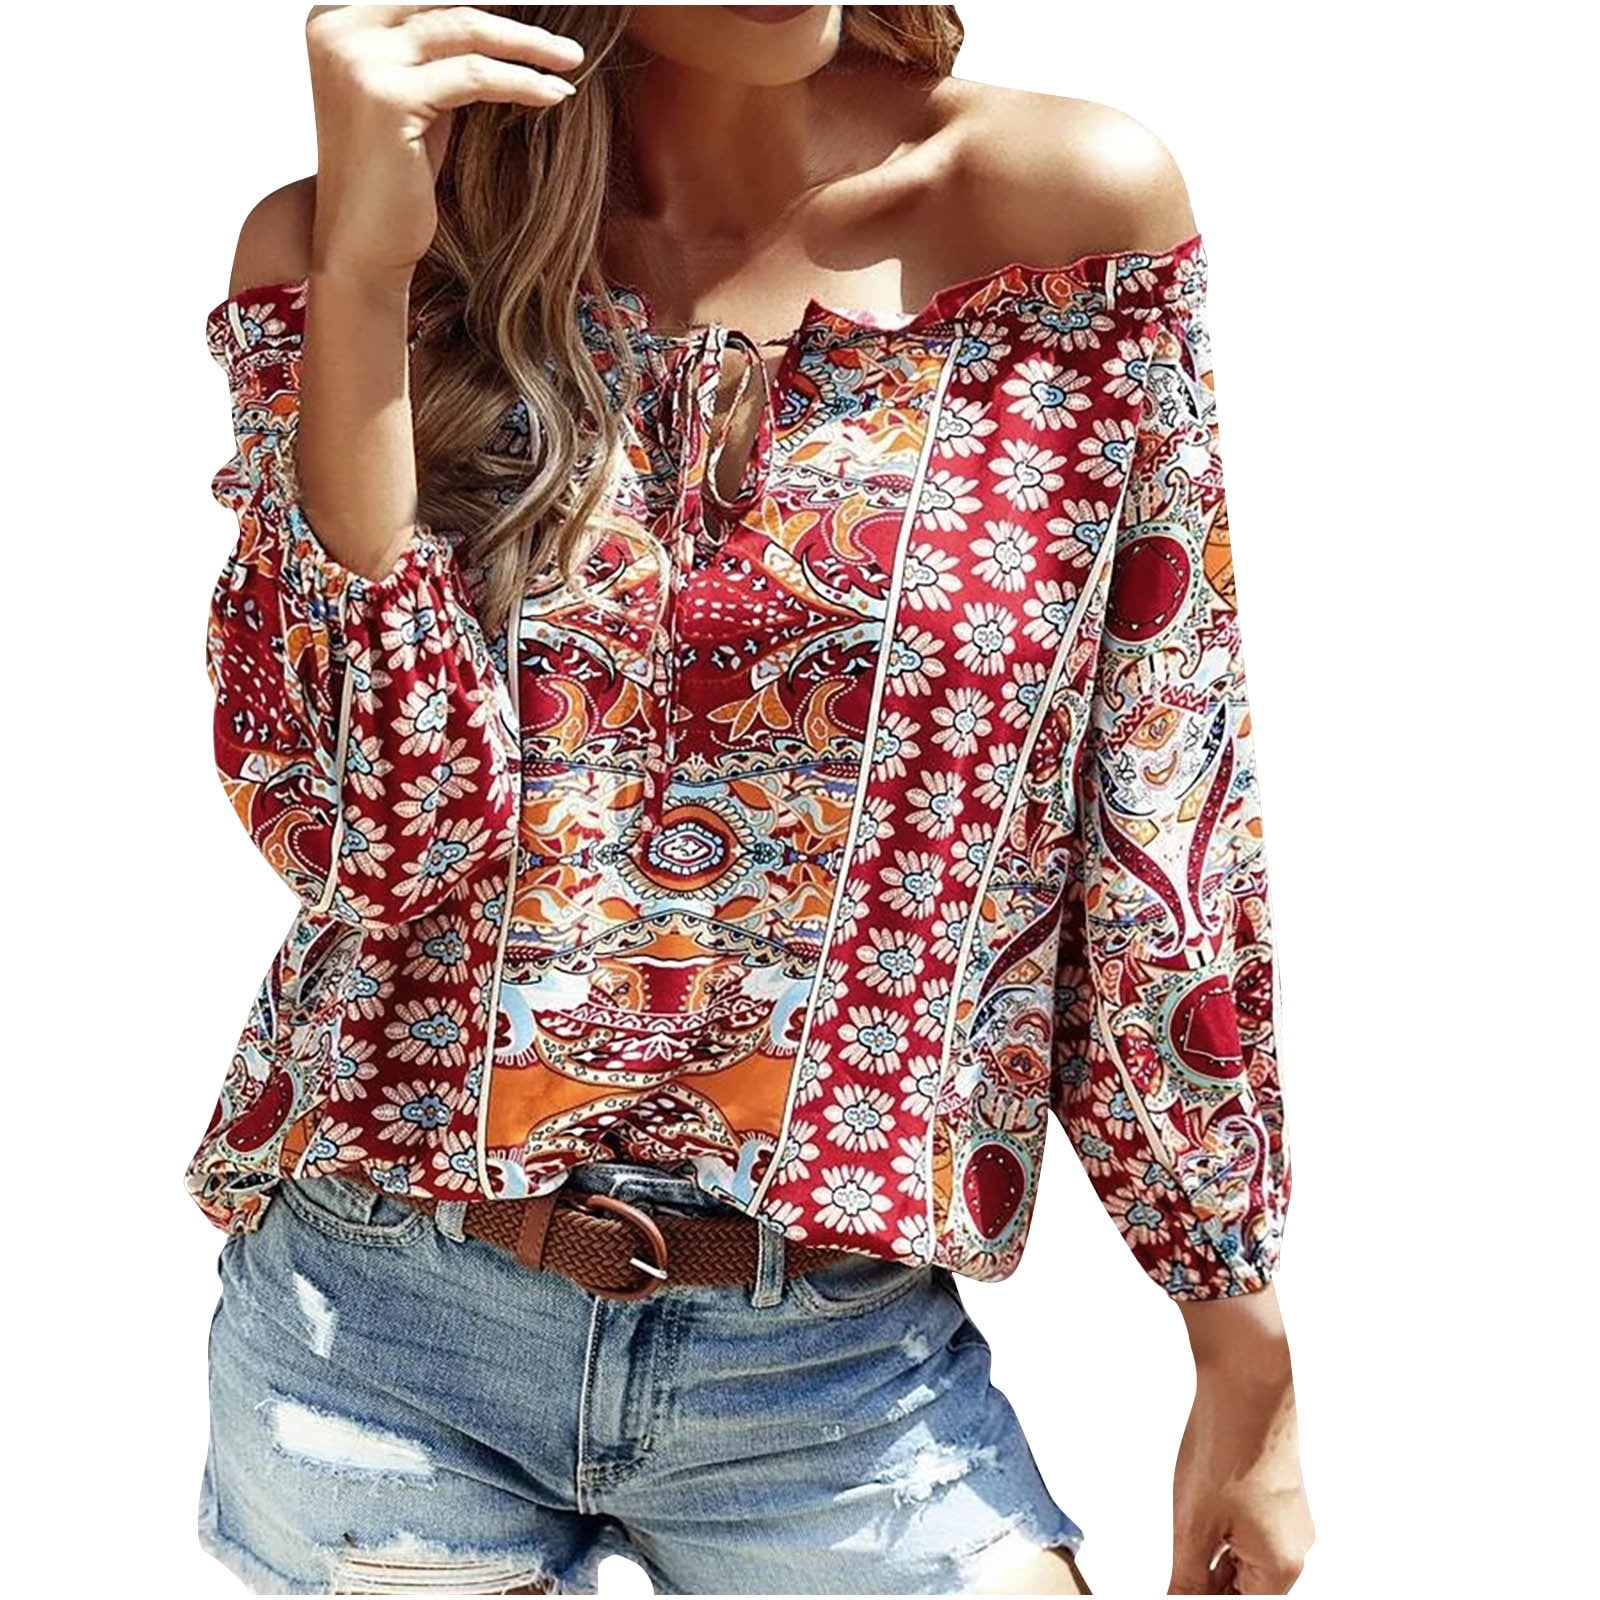 Long Sleeve Dark Ditsy Floral Corset Top with Cold Shoulder